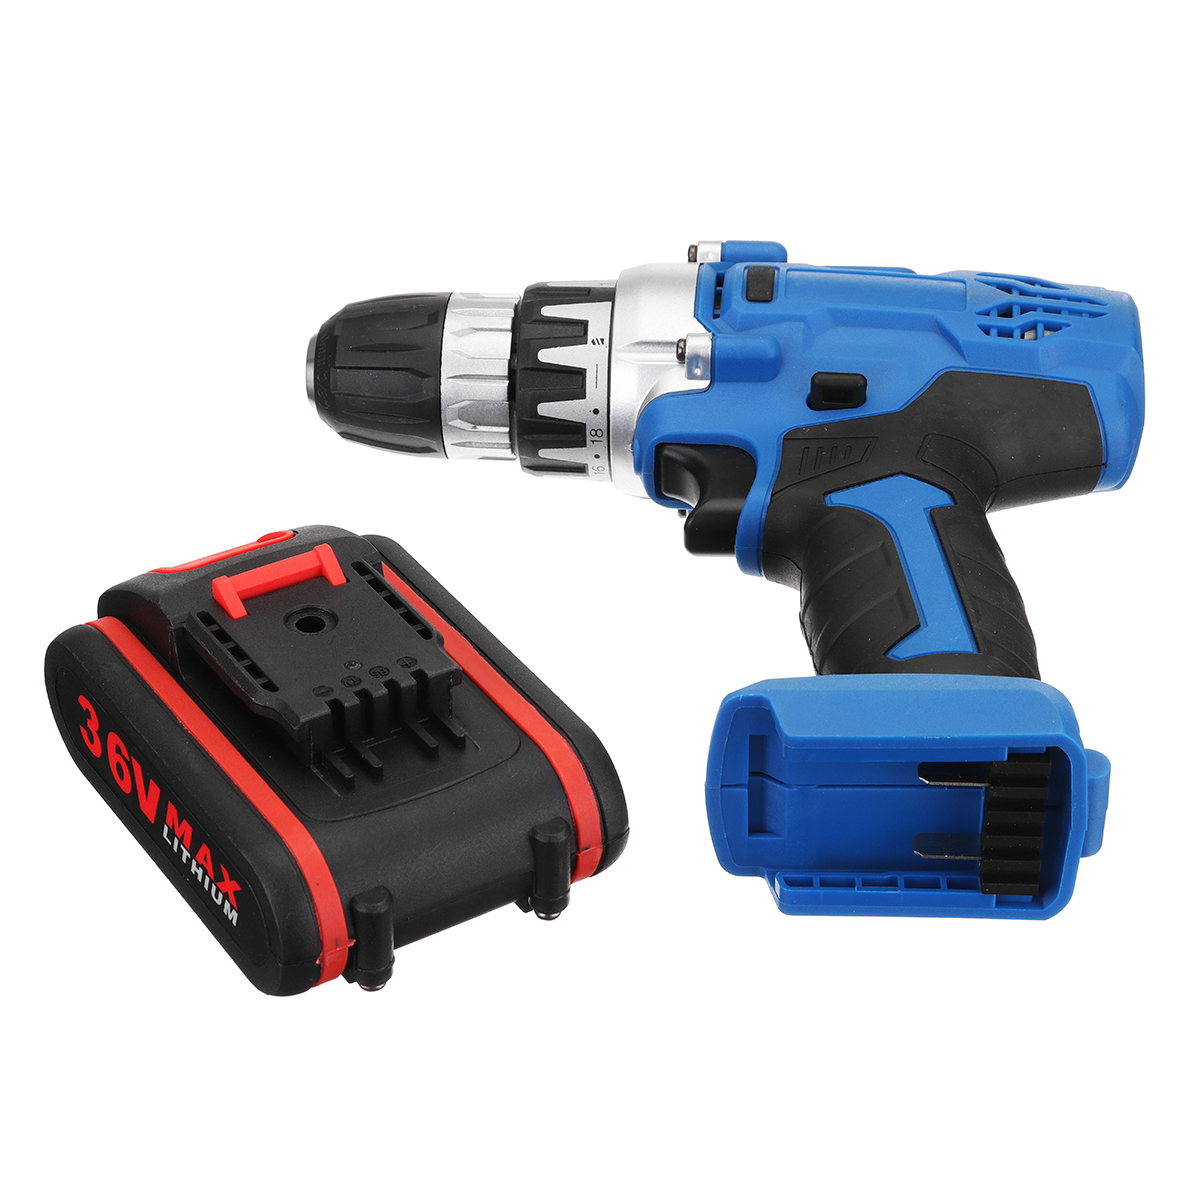 36V-Cordless-Power-Drill-Set-Double-Speed-Electric-Screwdriver-Drill-Power-Display-W-1-or-2-Li-Ion-B-1435859-9